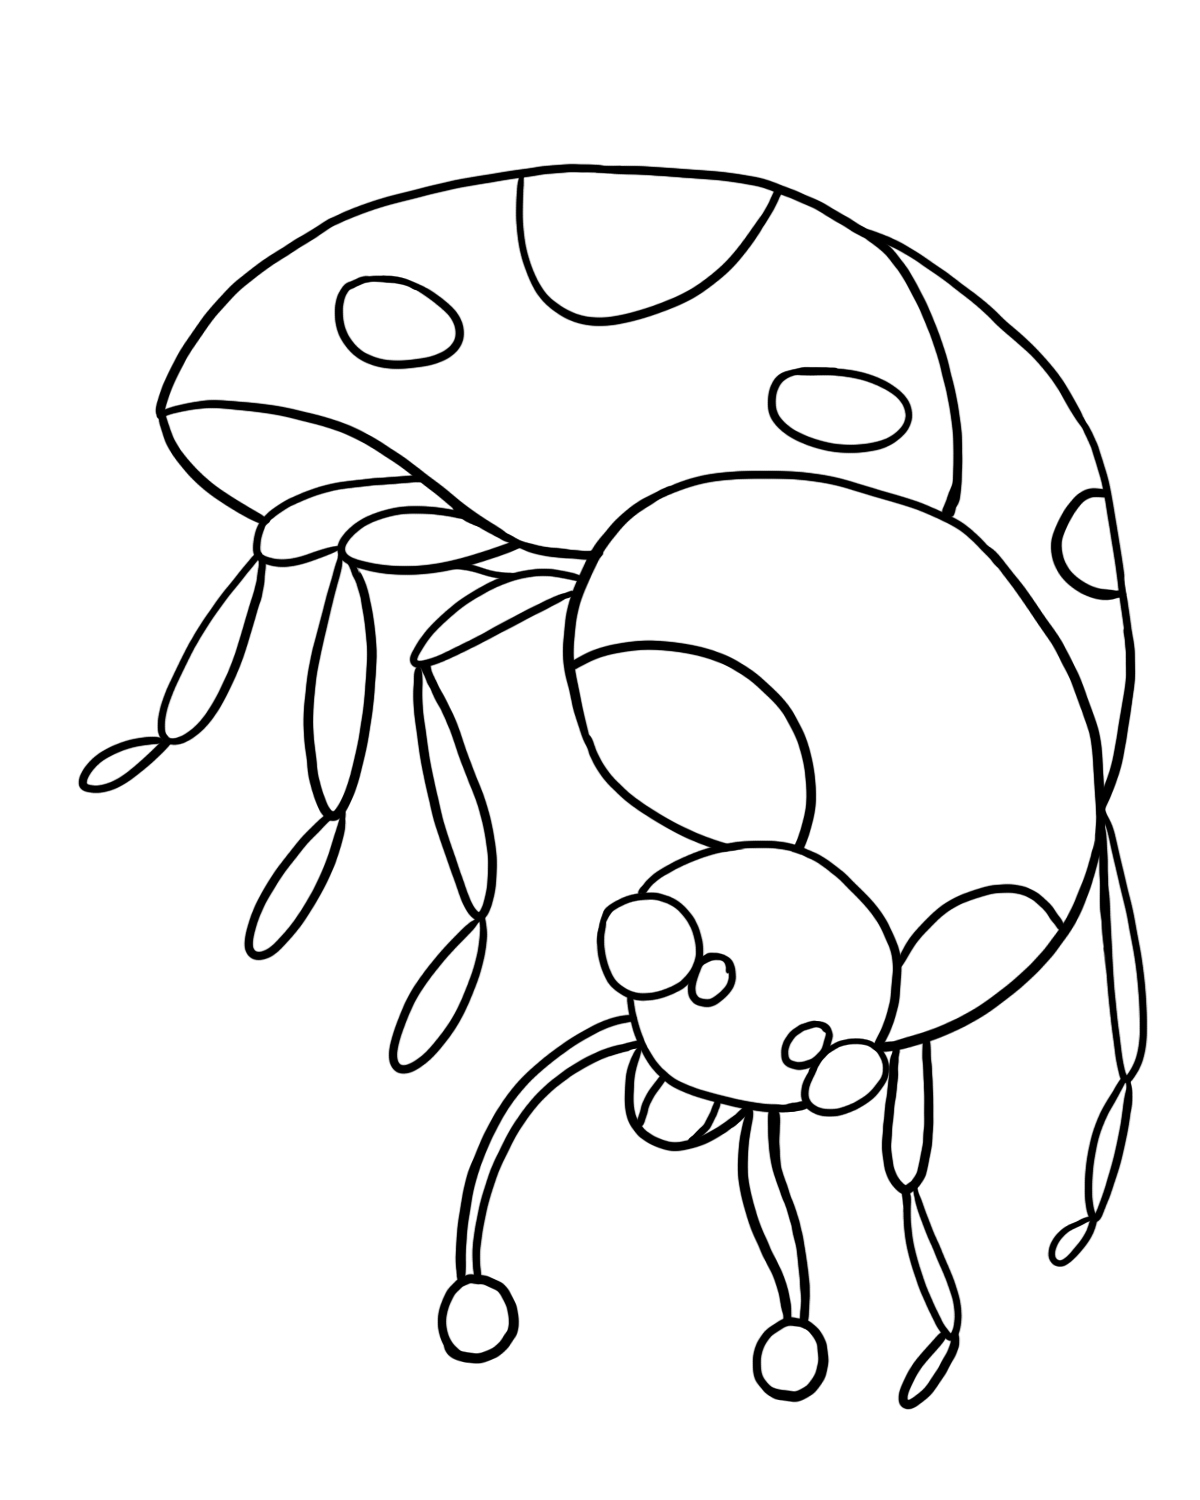 Ladybug Coloring Picture 1